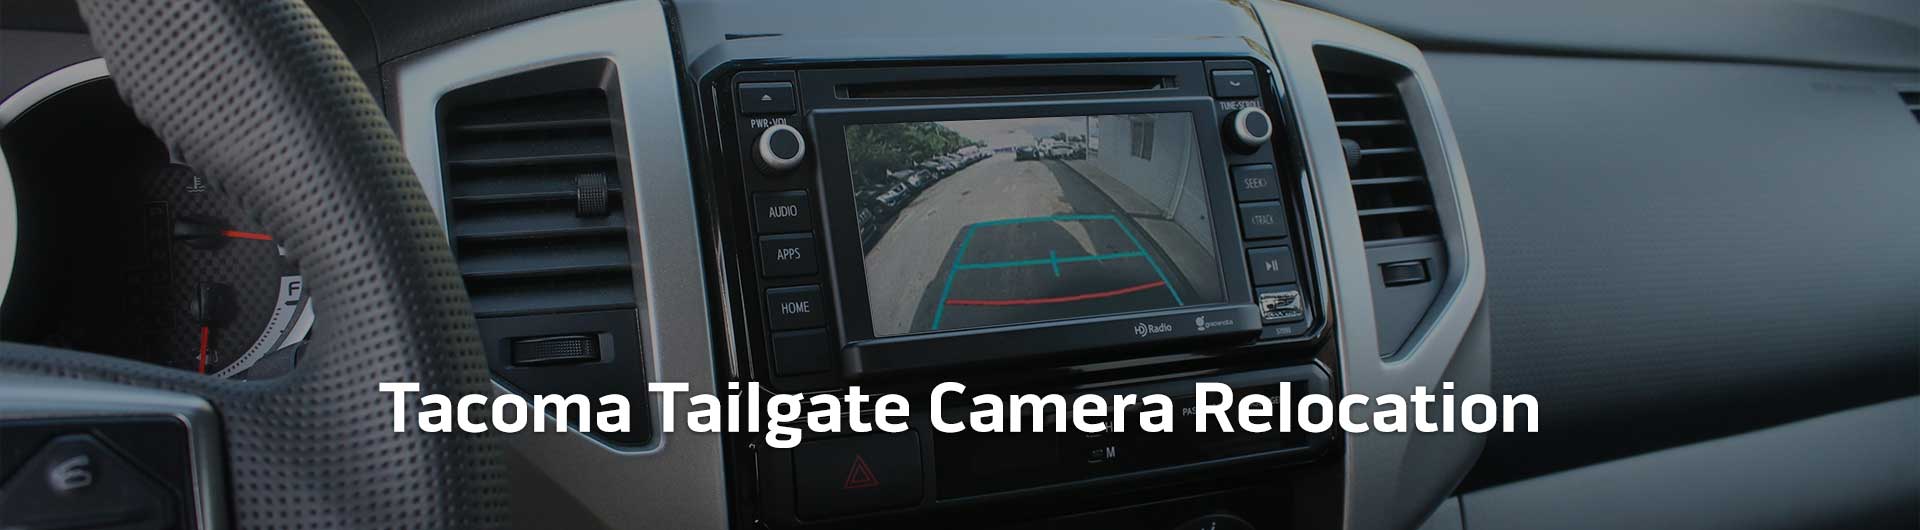 An image showing the in-dash monitor of a Toyota Tacoma. The in-dash monitor shows that the truck is in reverse and is displaying the backup camera. The image has text that reads Toyota Tacoma Tailgate Camera Relocation.